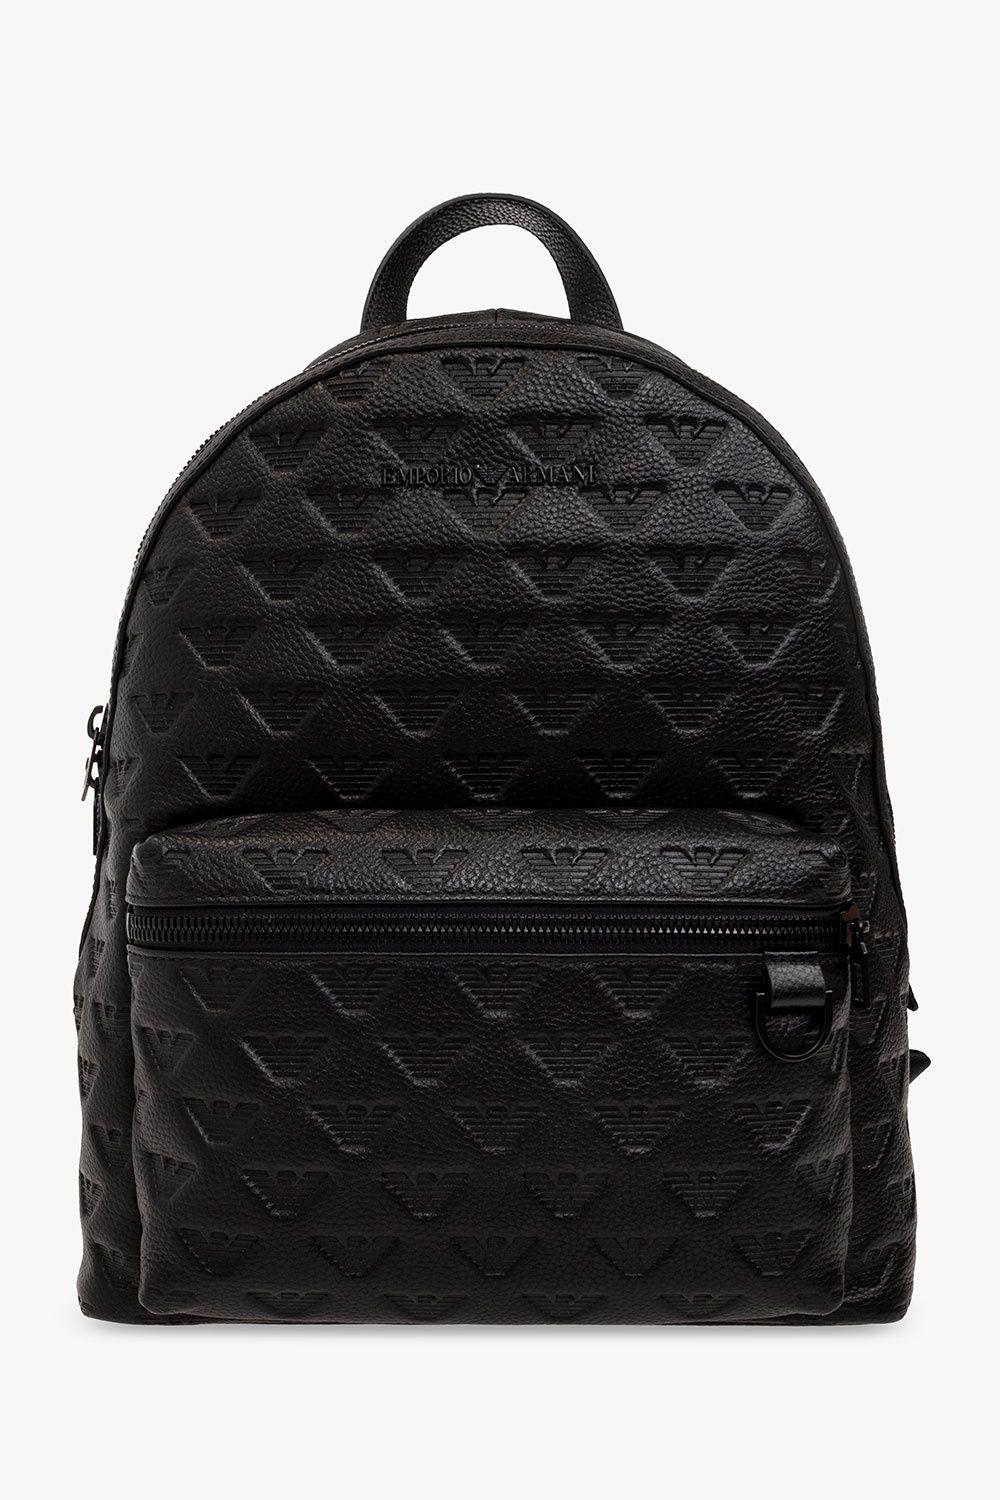 Emporio Armani Embossed Leather Backpack in Black for Men | Lyst